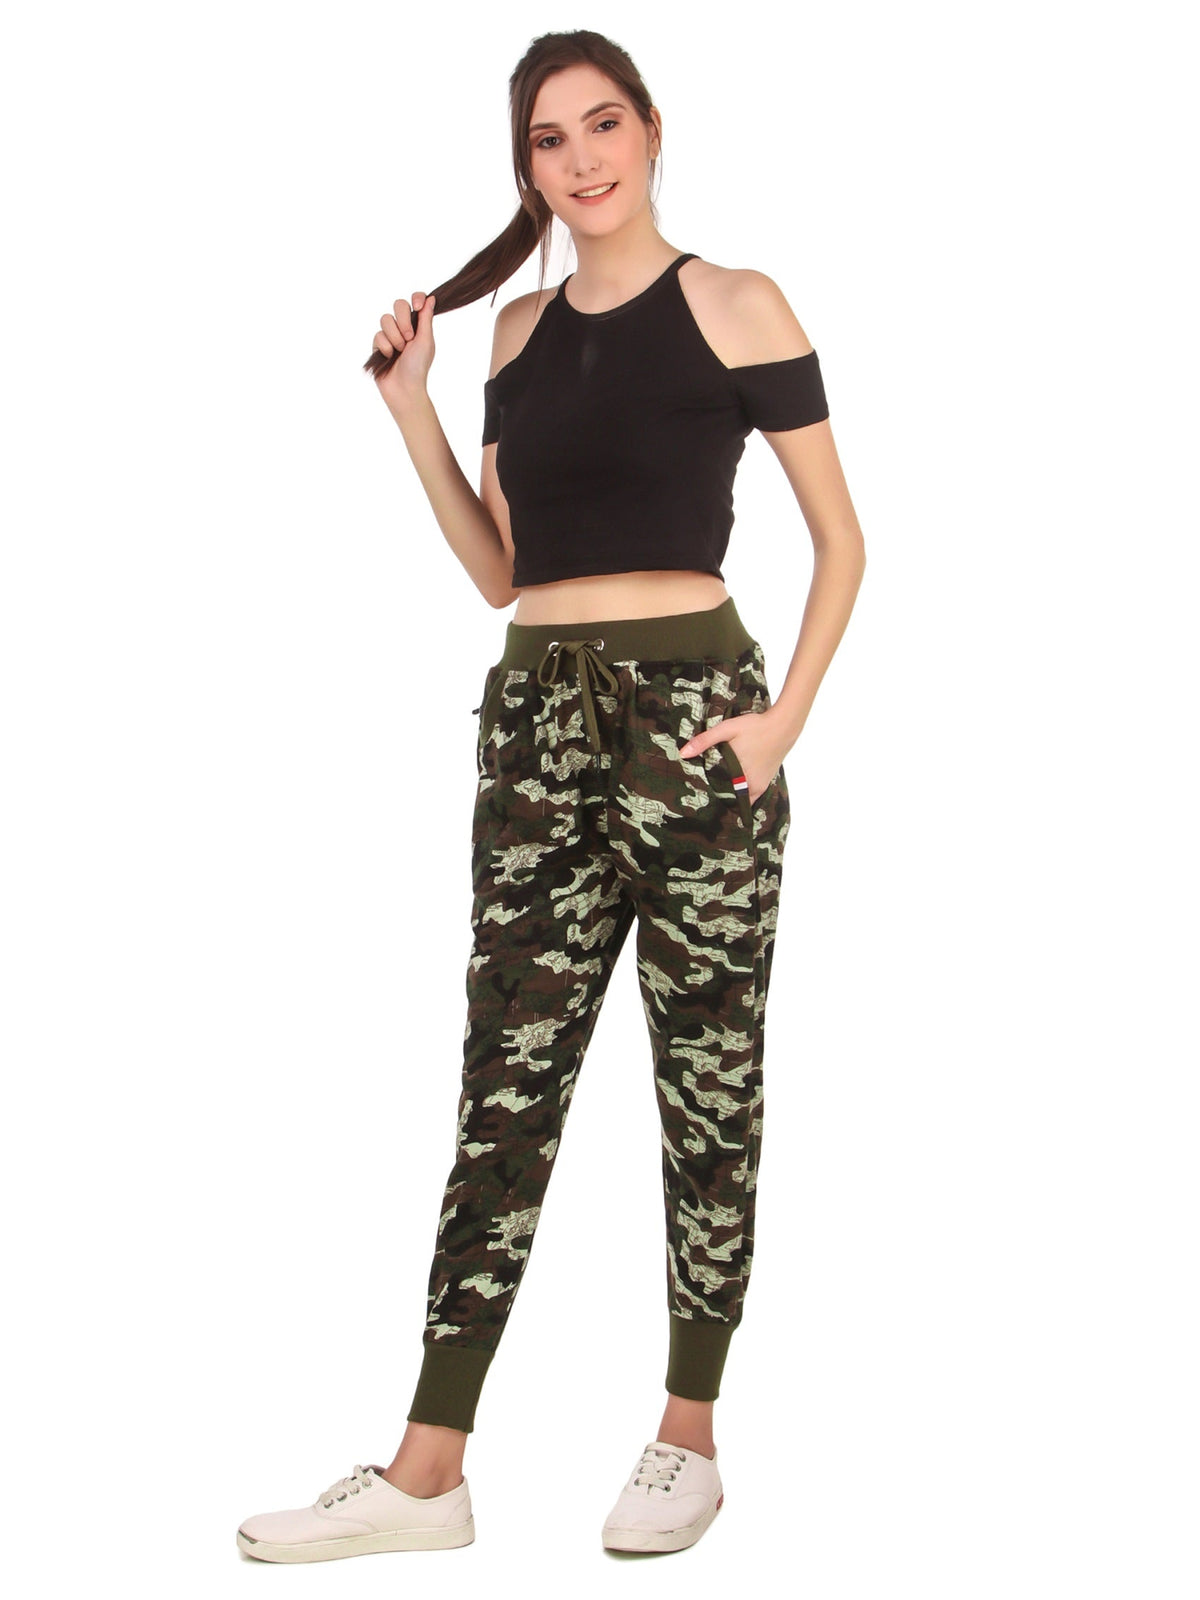 Buy Blue Camo Cargo Pants, Army Print Baggy Cargo Pants, Camouflage Trousers,  Flap Pockets, Military Style Pants, Size 27, Medium Large Online in India -  Etsy